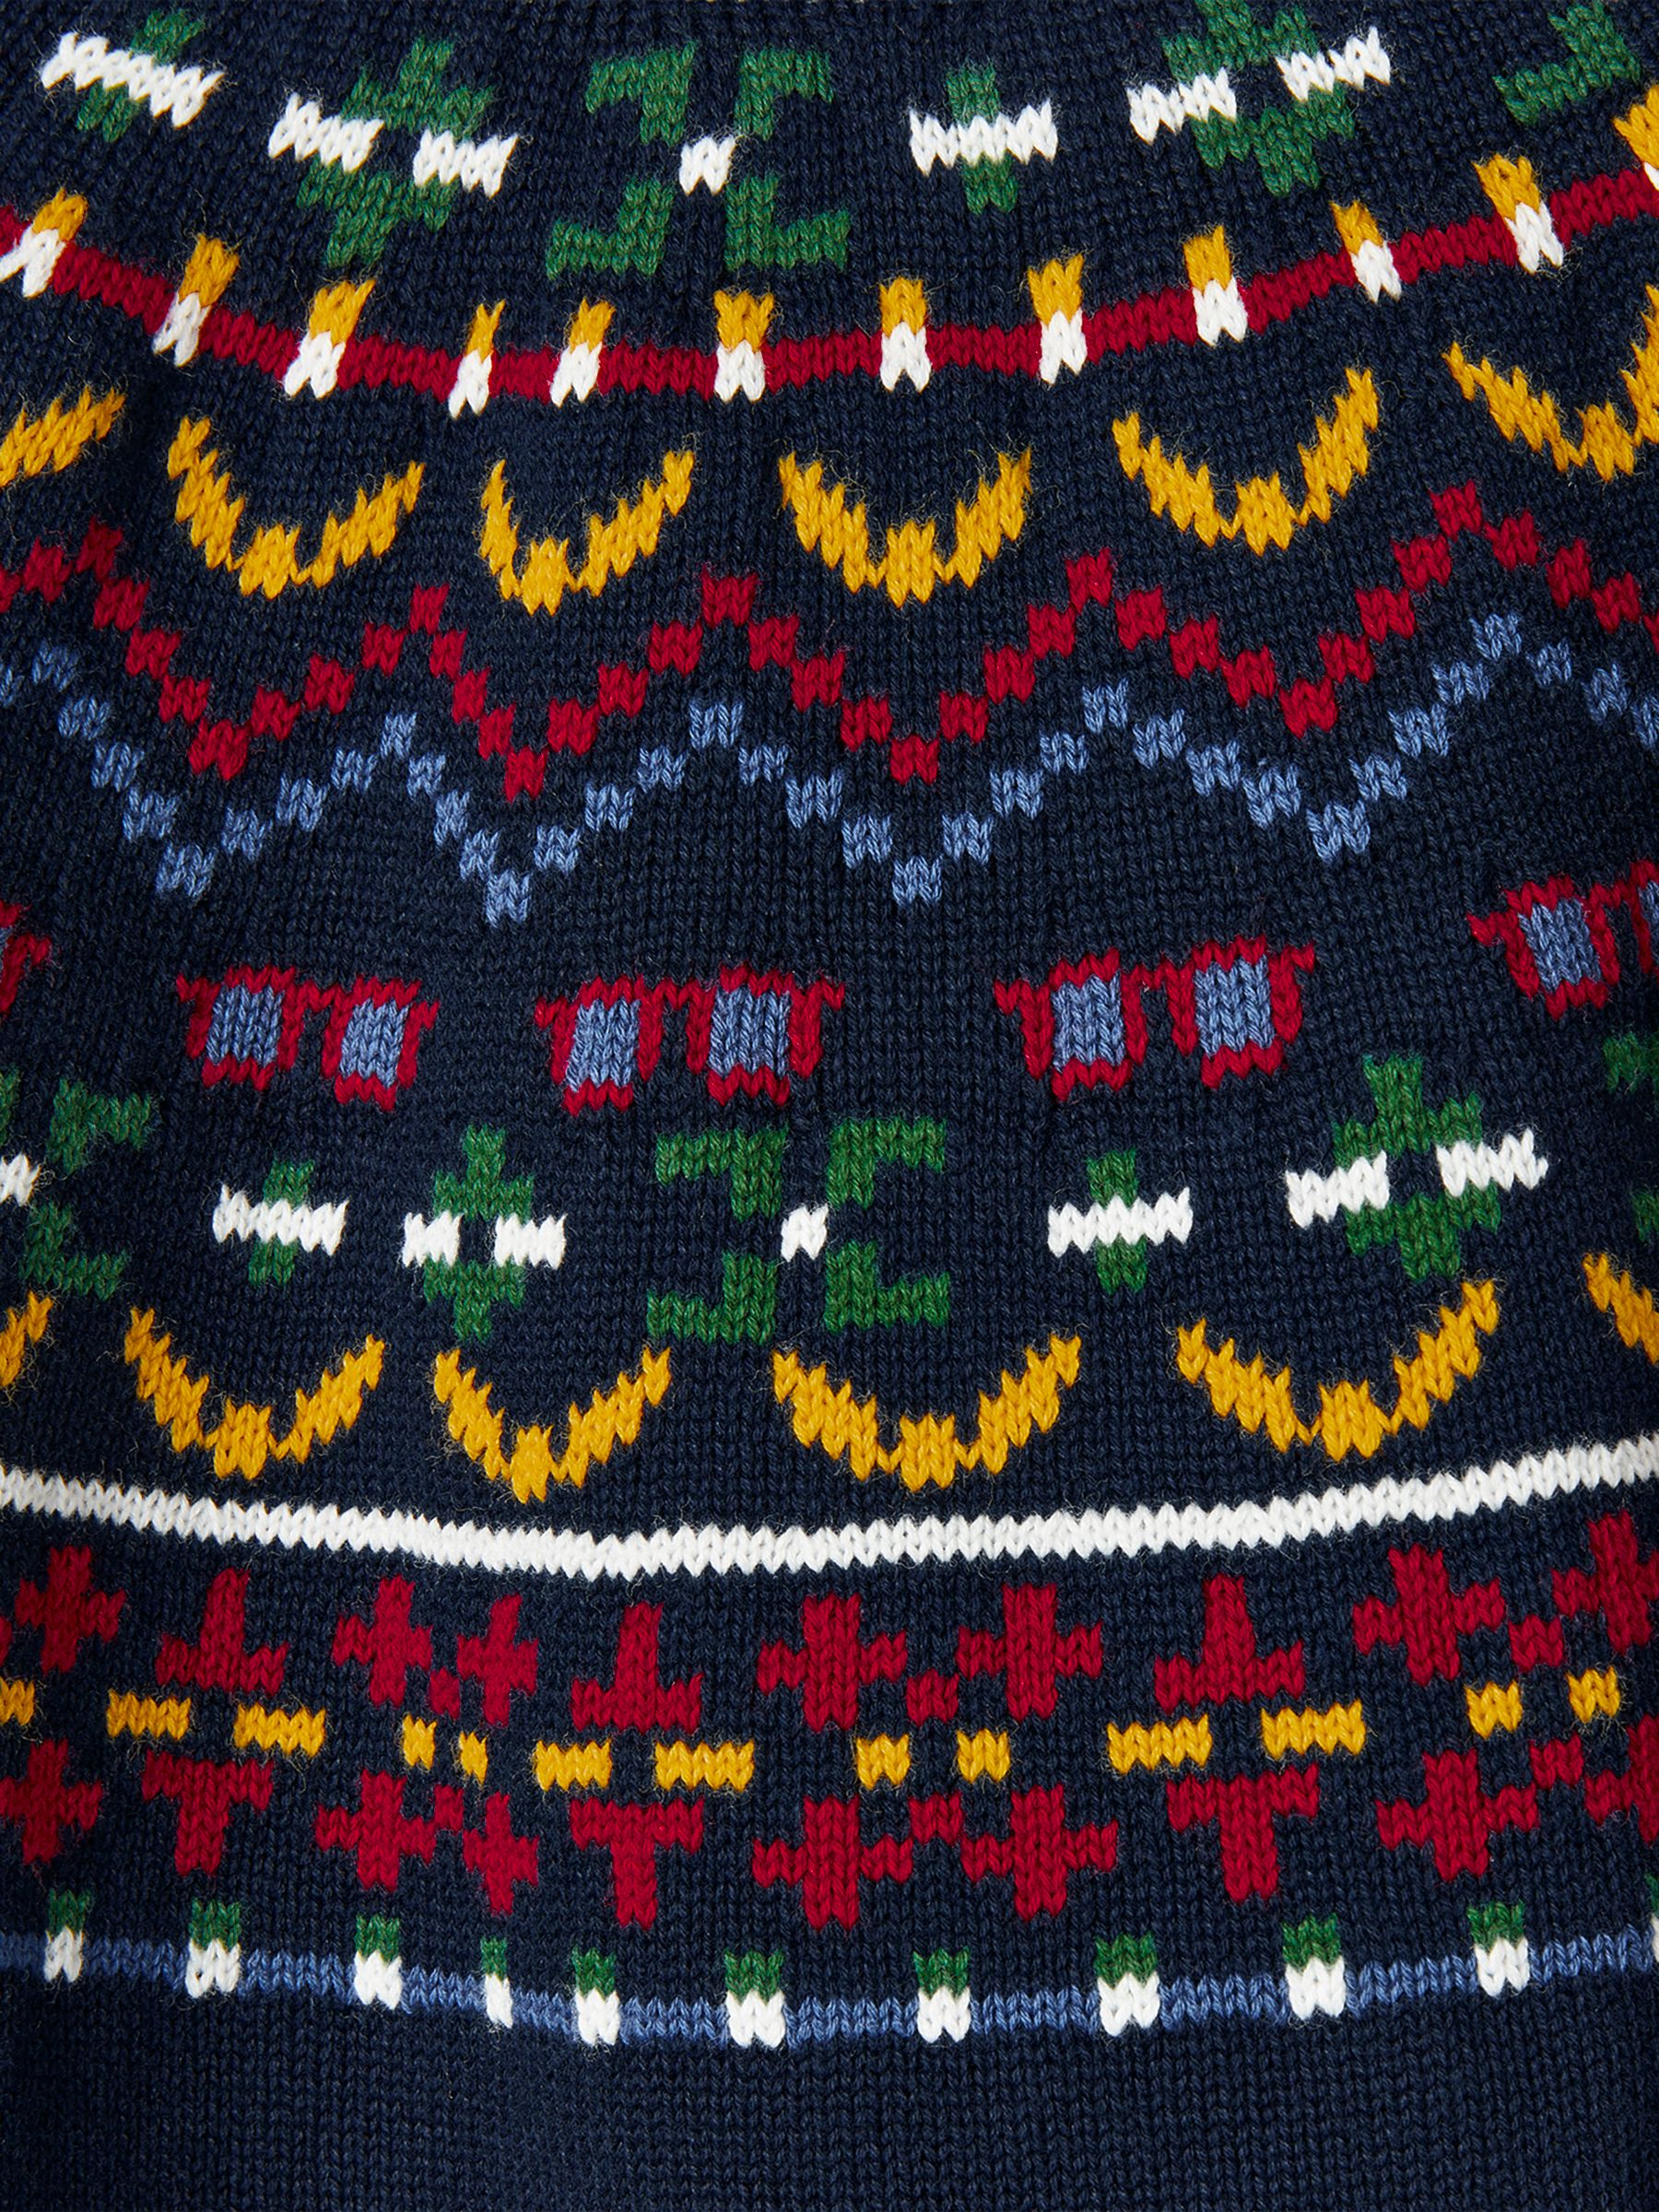 Buy Joules Ron Harry Potter™ Fair Isle Jumper from the Joules online shop